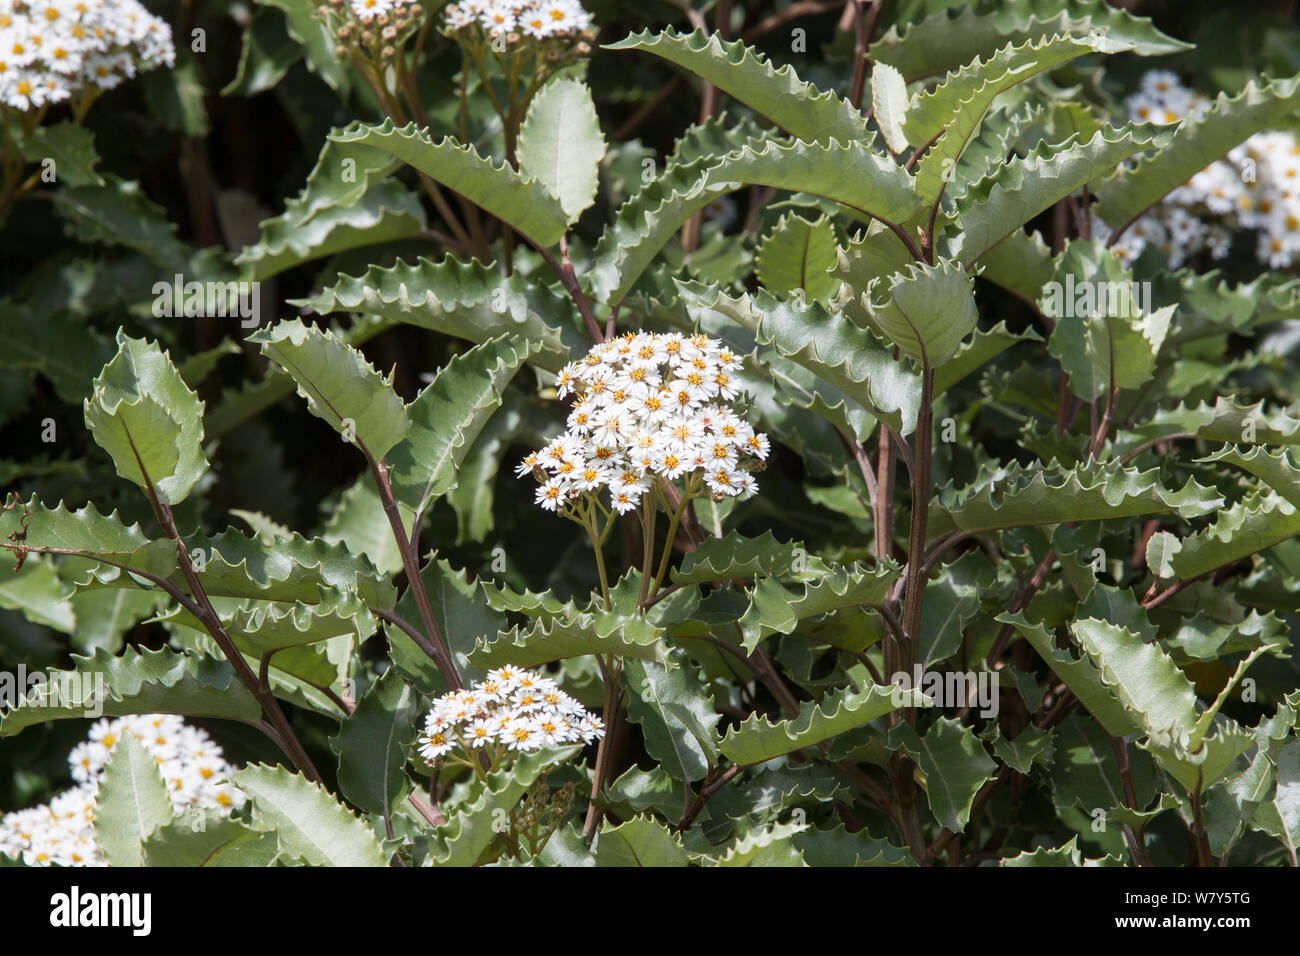 New Zealand or Mountain holly (Olearia macrodonta) in full flower. St Agnes, Isles of Scilly, United Kingdom. May. Cultivated species naturally endemic to New Zealand. Stock Photo